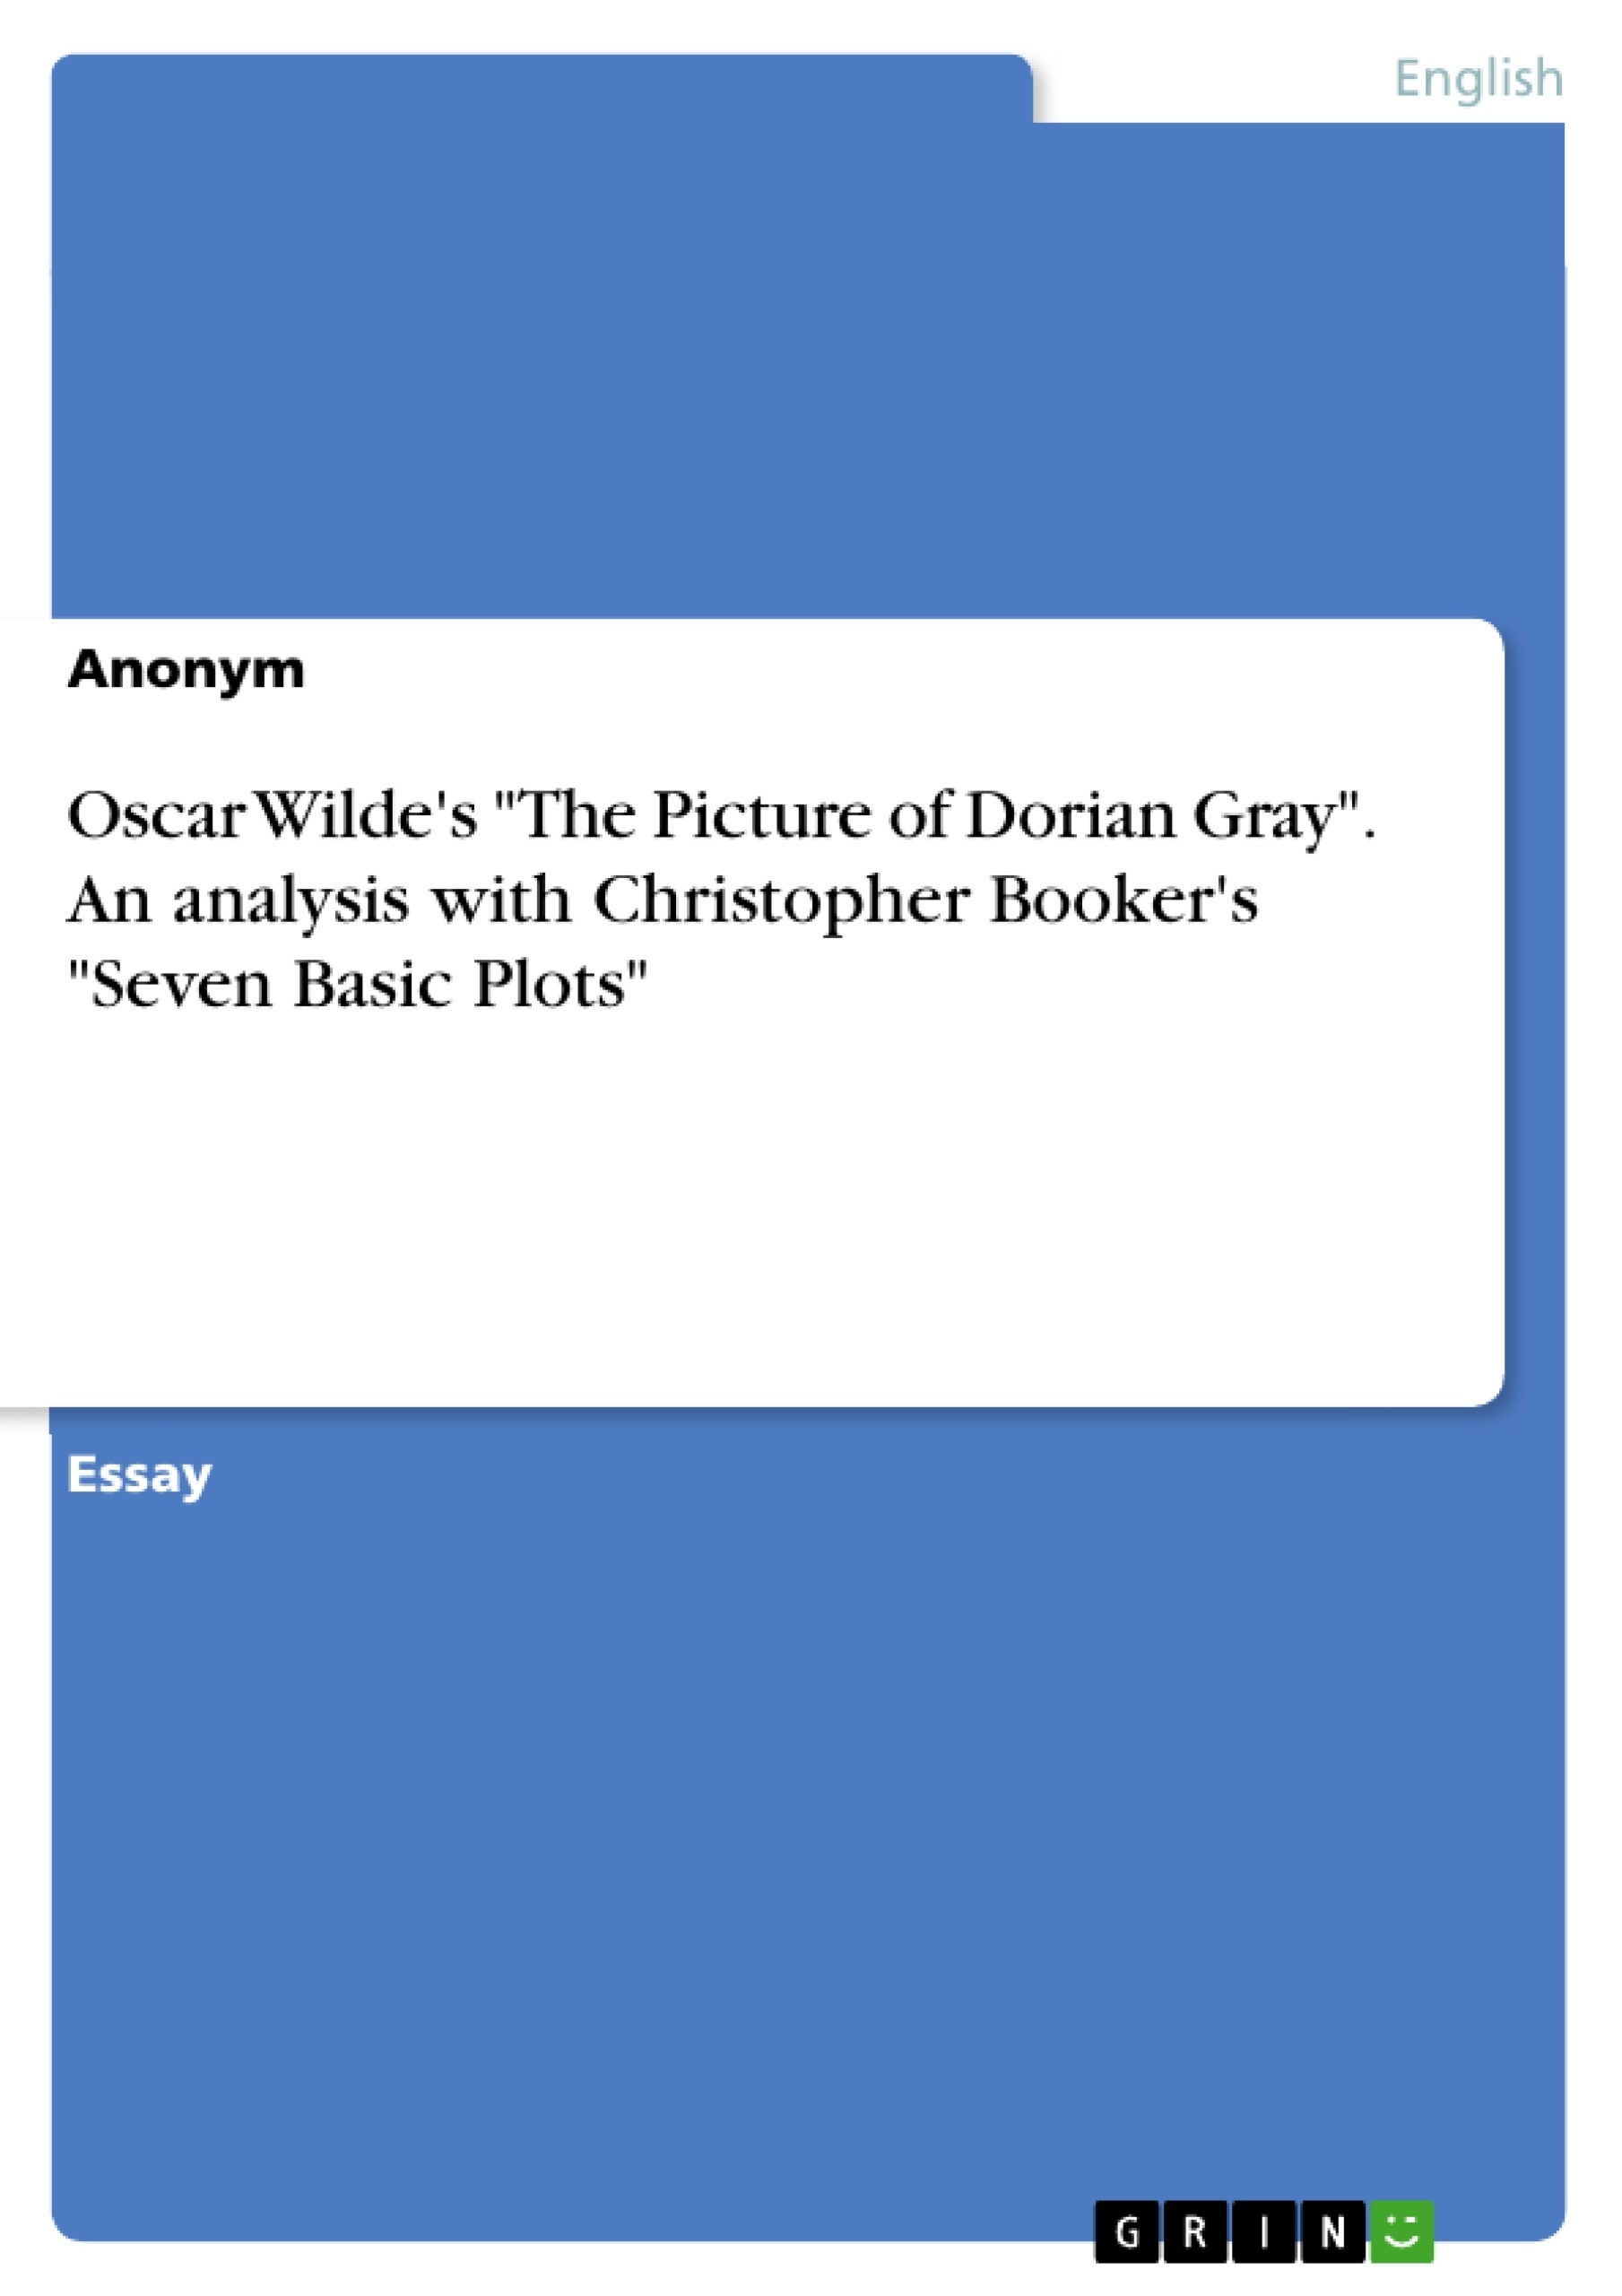 Título: Oscar Wilde's "The Picture of Dorian Gray". An analysis with Christopher Booker's "Seven Basic Plots"